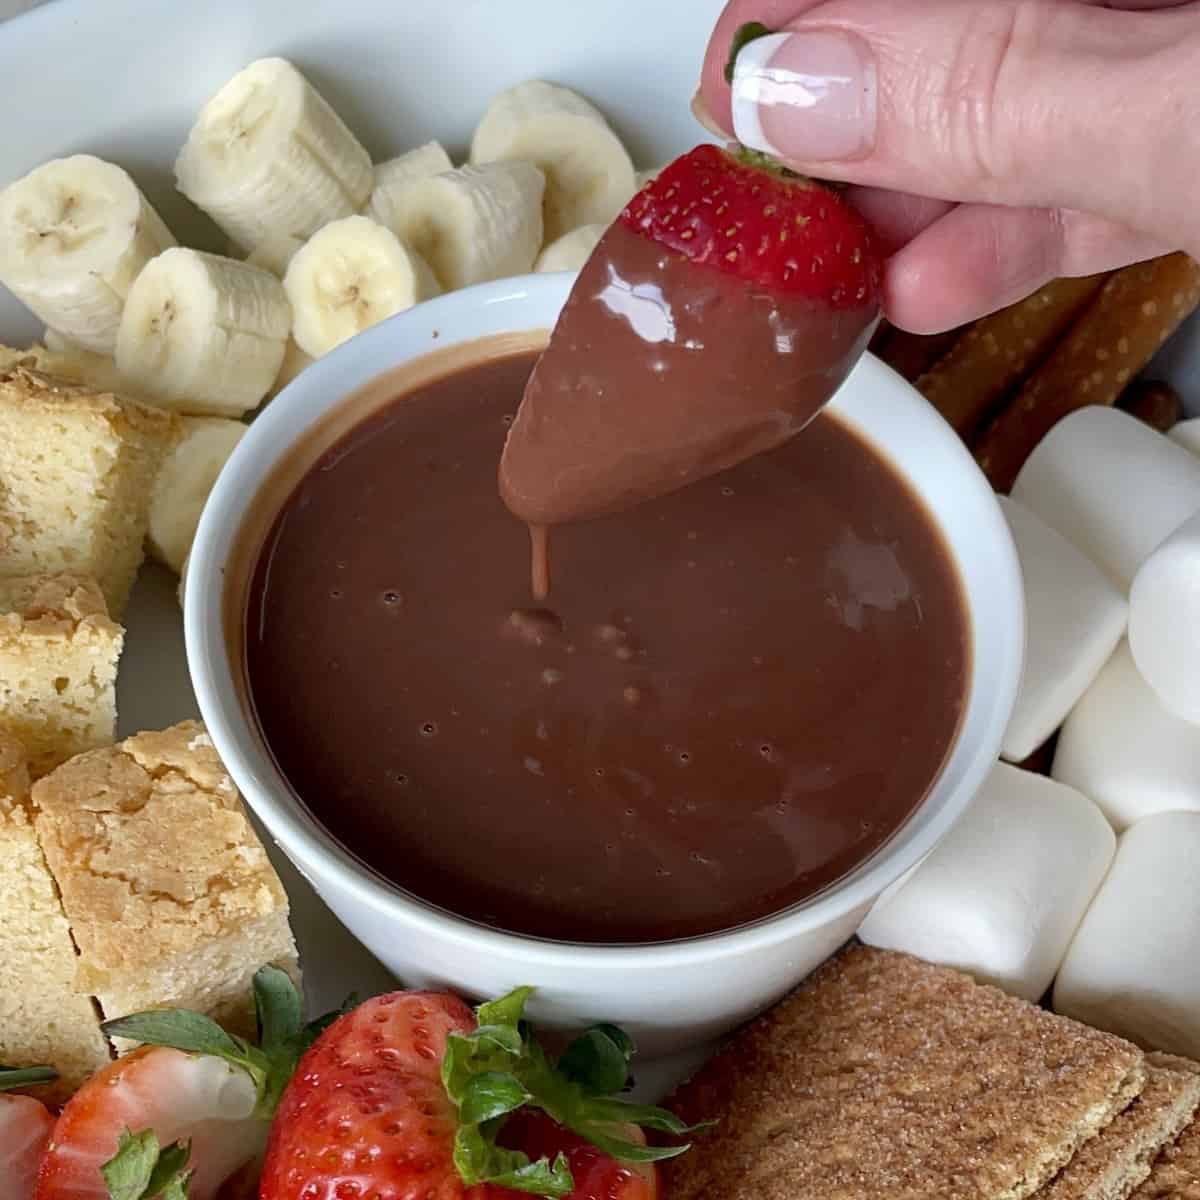 a strawberry being dipped into chocolate dipping sauce in a white porcelain bowl surrounded by cut bananas pound cake strawberries marshmallows and graham crackers